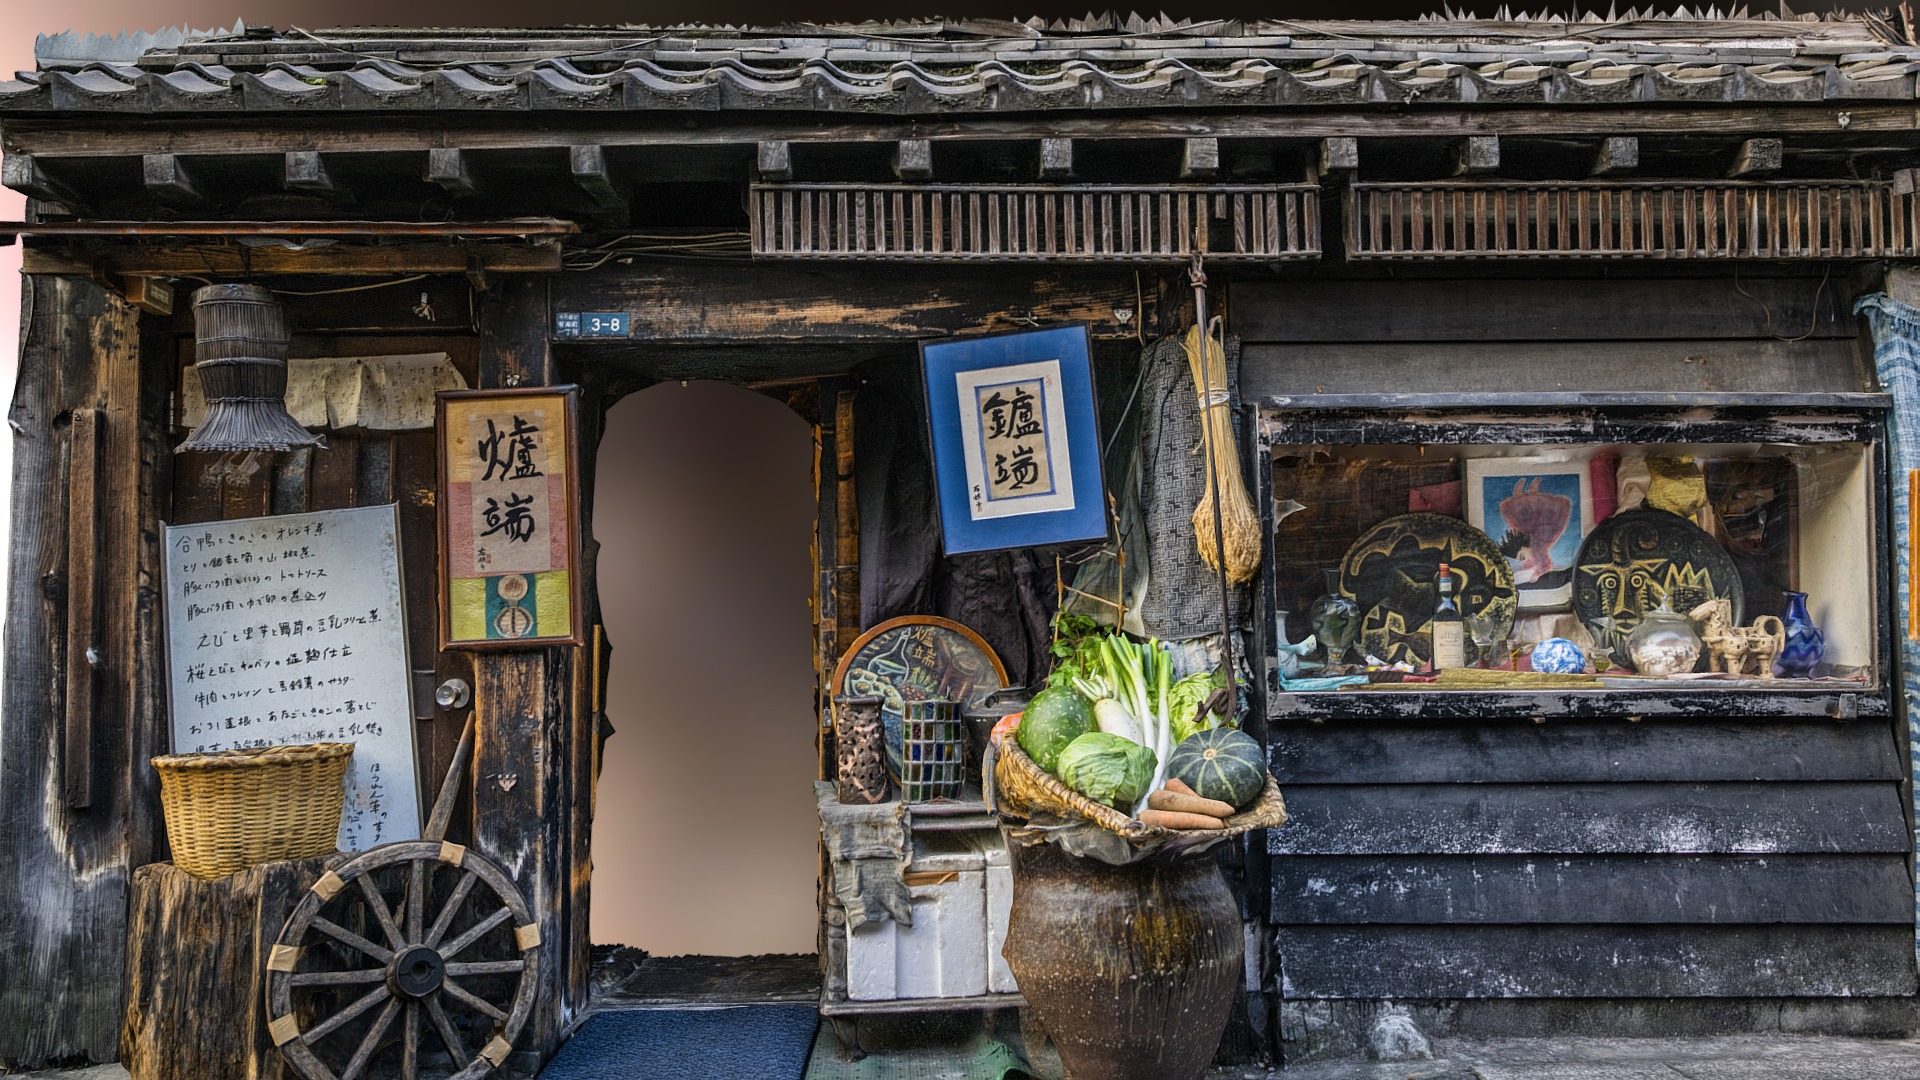 3D model Japanese shop photogrammetry scan - This is a 3D model of the Japanese shop photogrammetry scan. The 3D model is about a building with a wood door and a cart with plants and a basket.